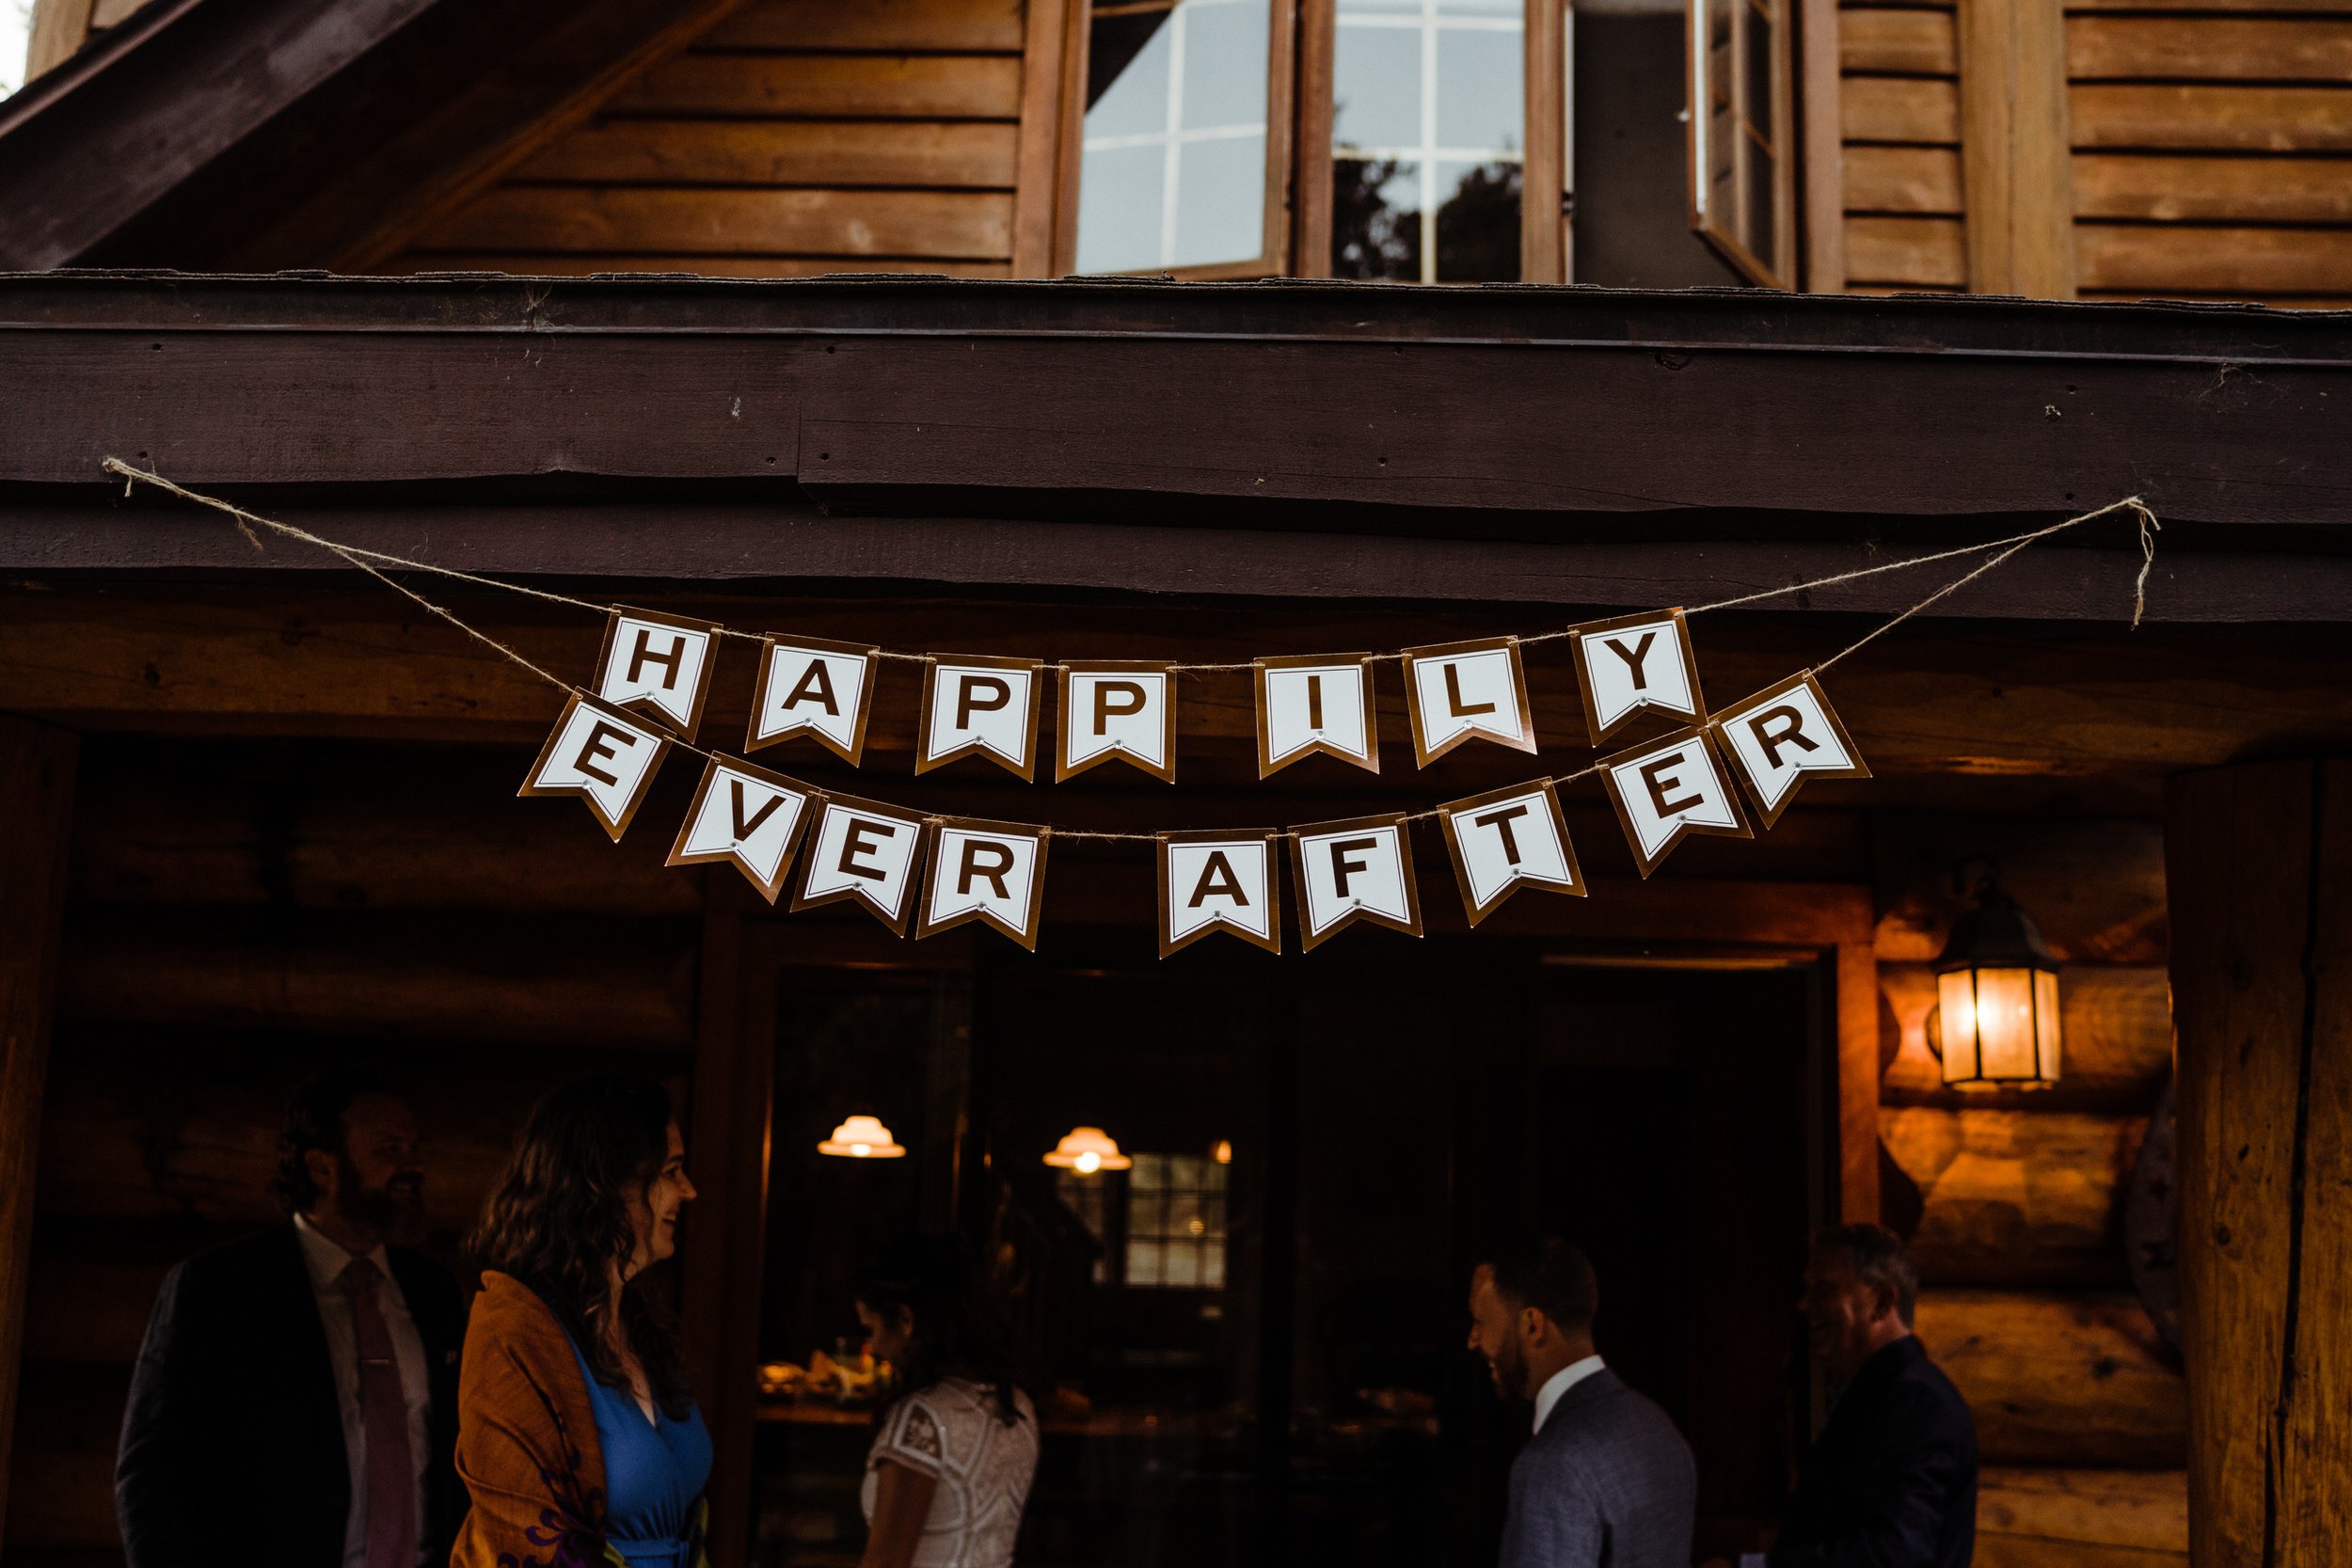 Cabin-Lodge-Wedding-Happily-Ever-After-Sign.jpg